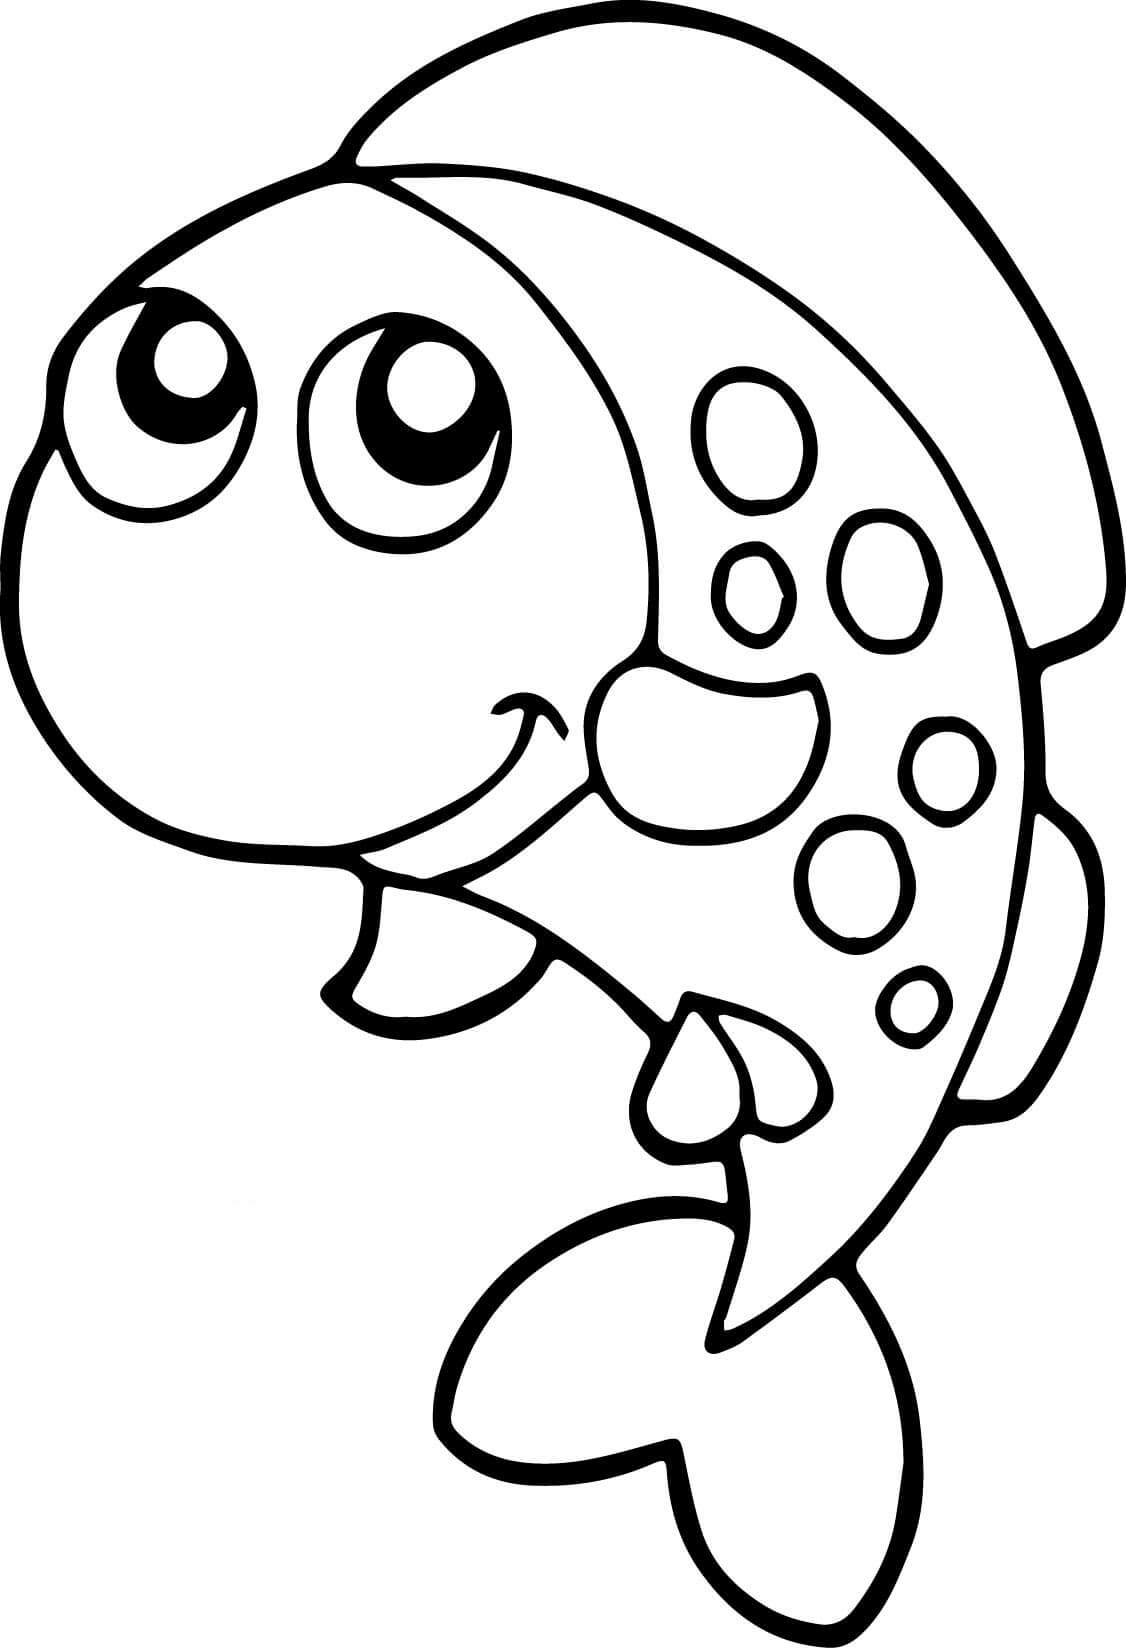 Cute Fish Coloring Page for Kids